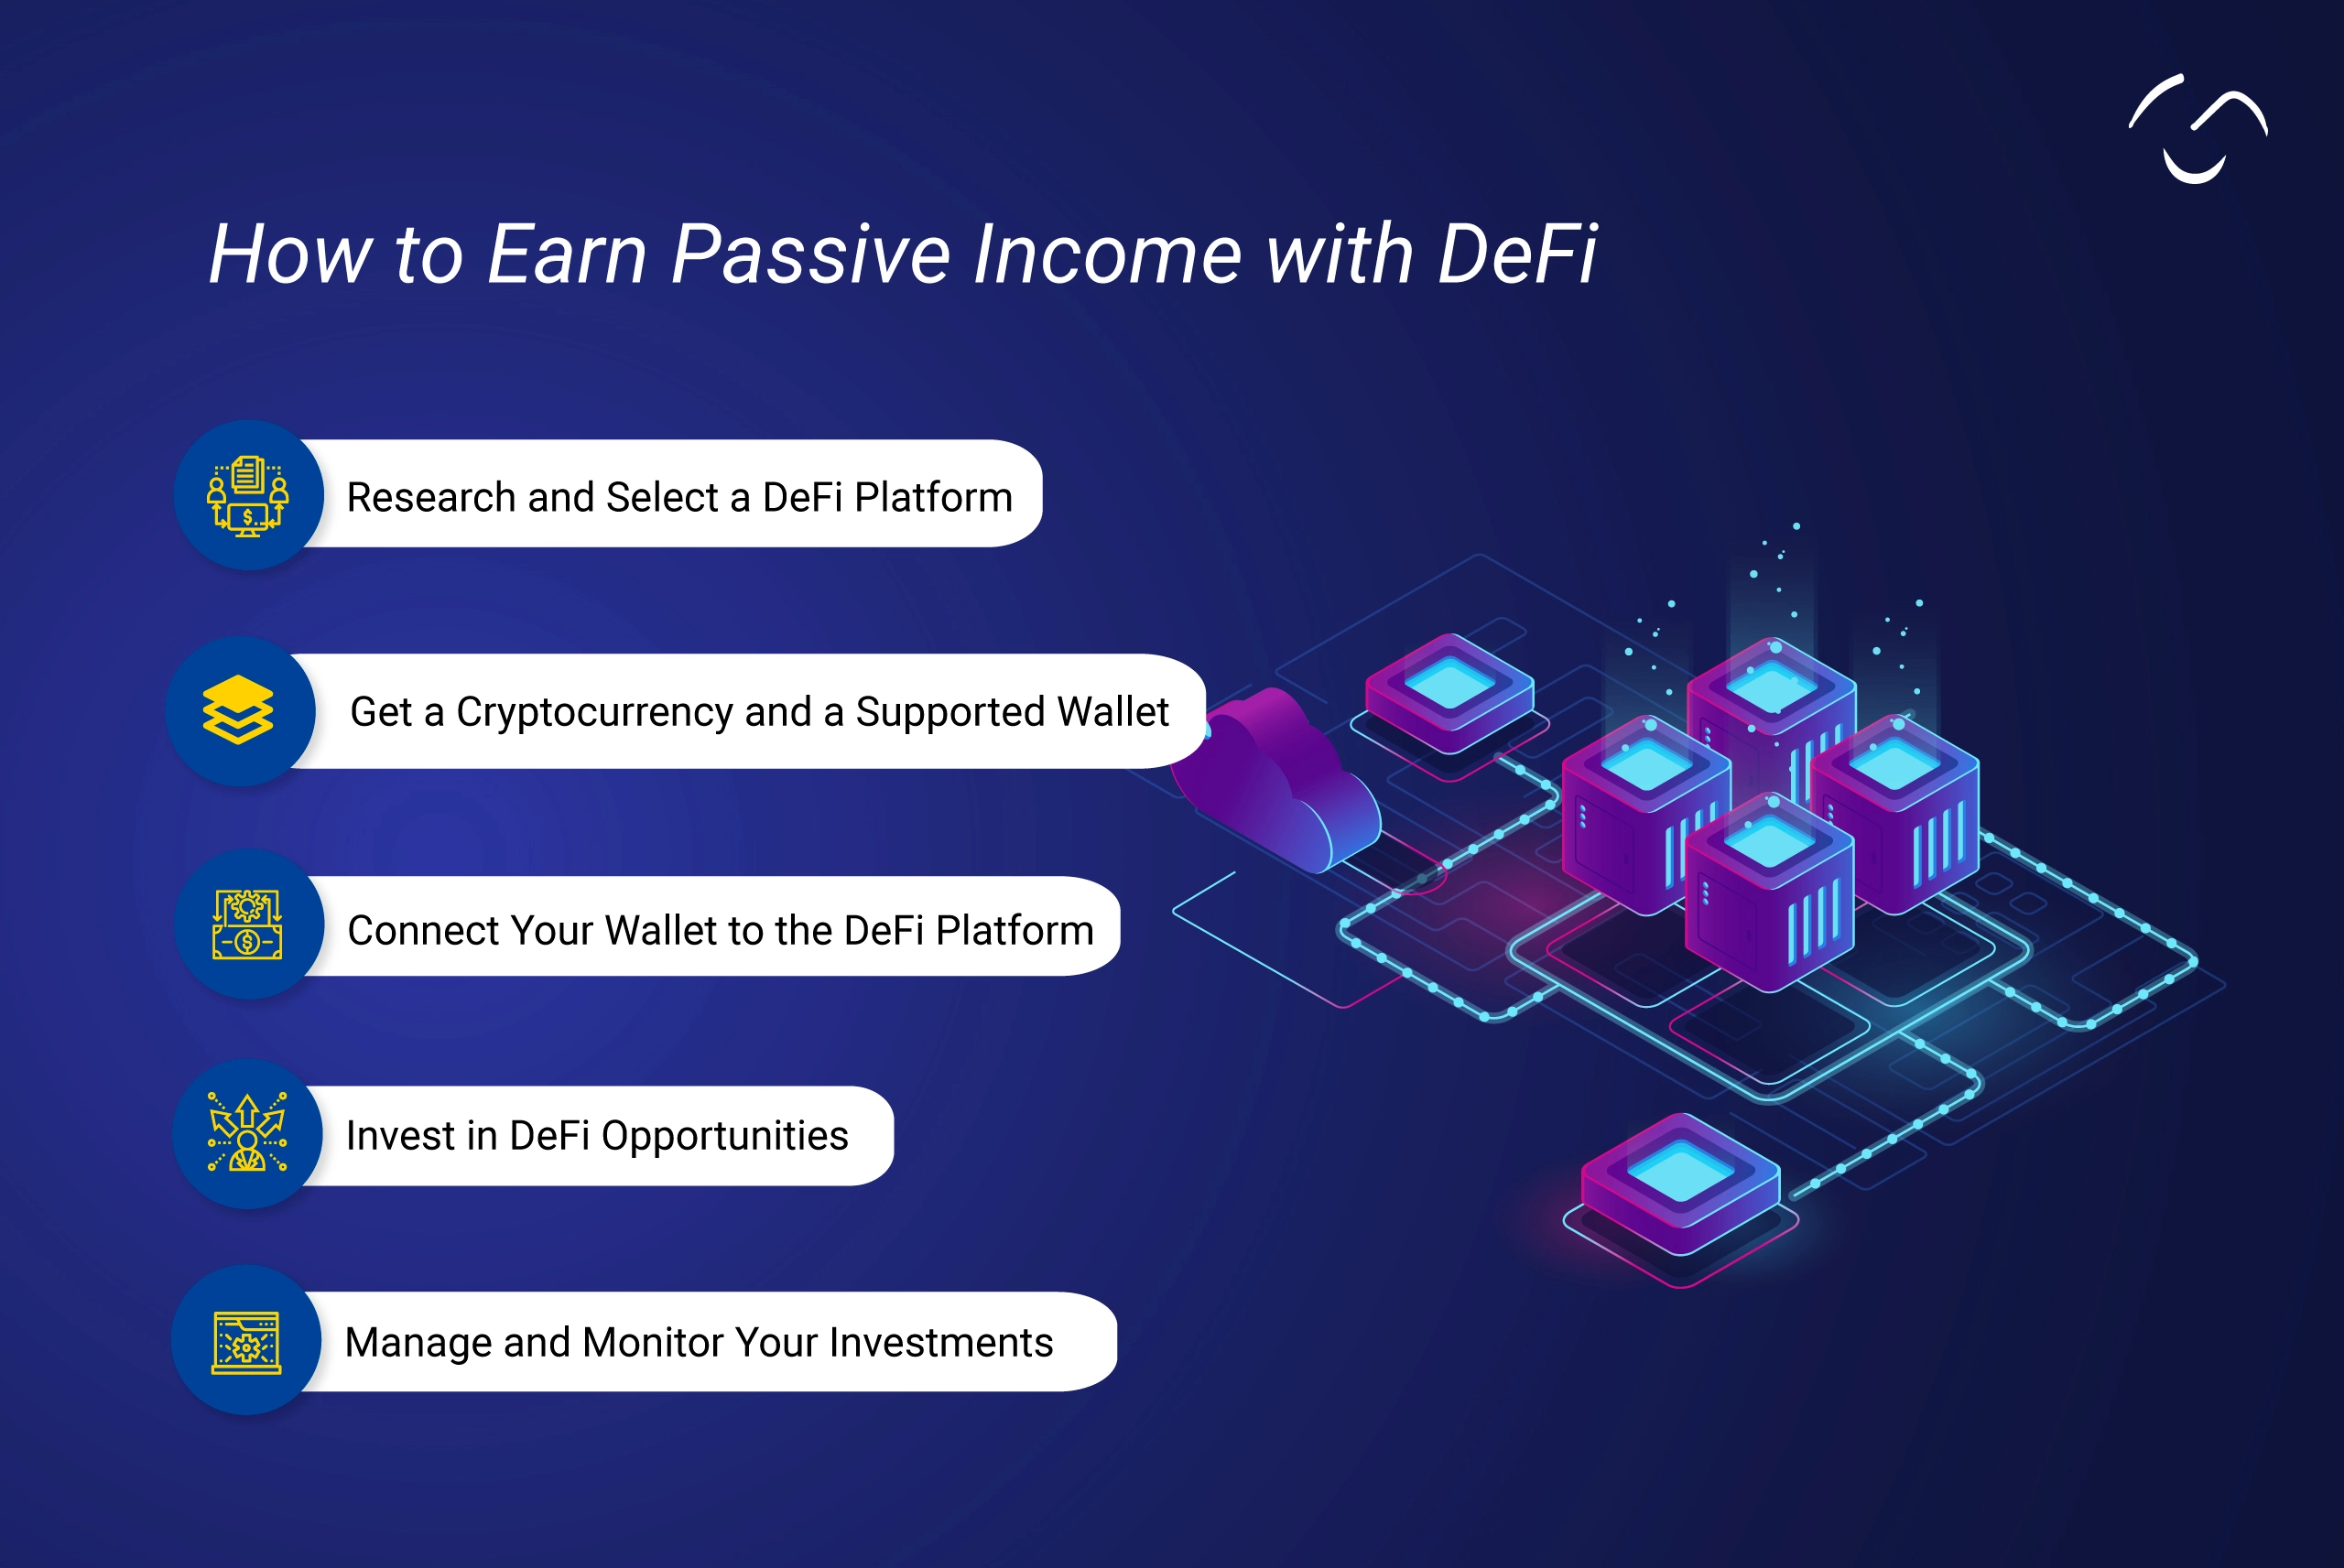 How to earn passive income with DeFi